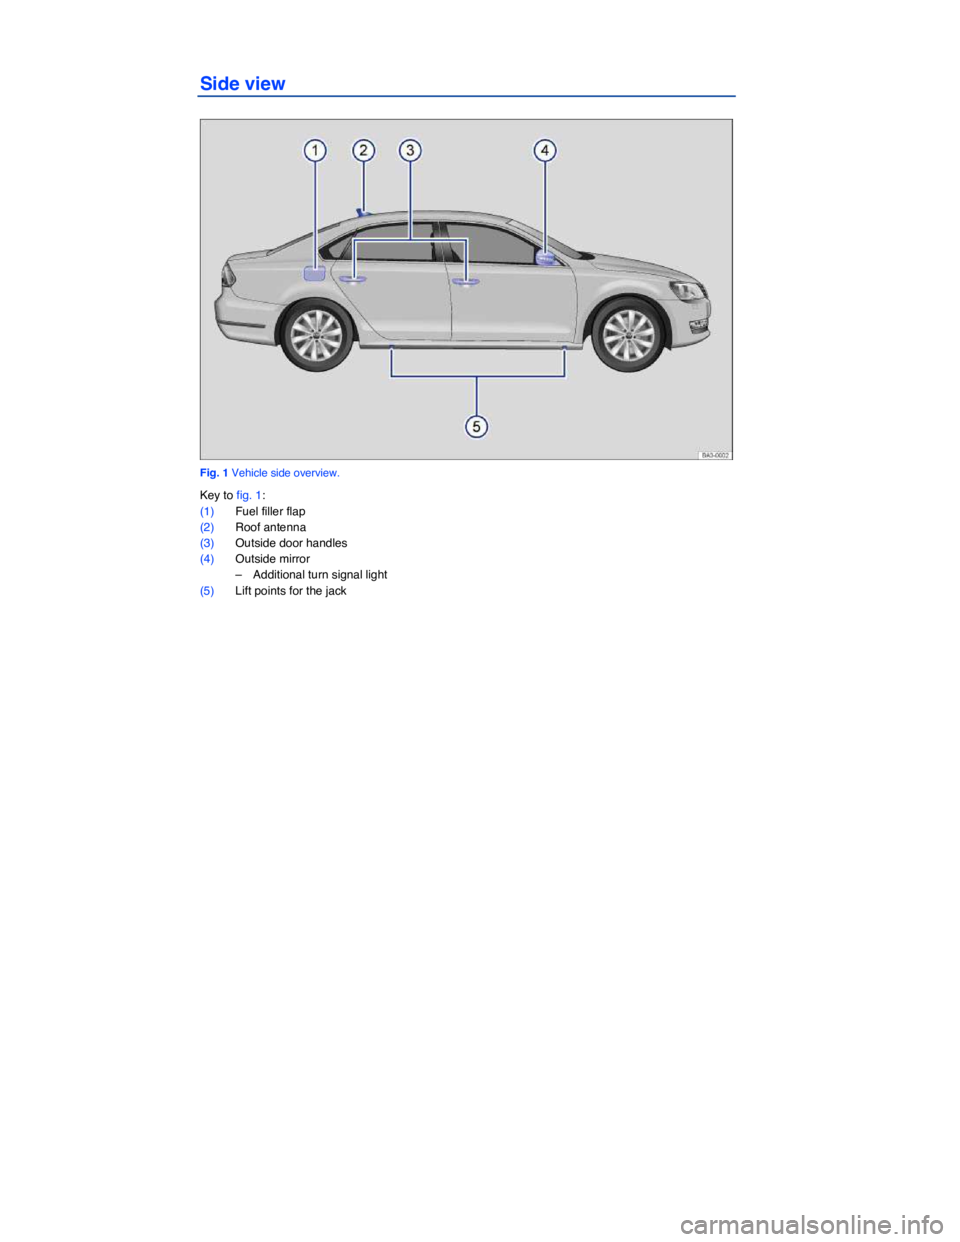 VOLKSWAGEN PASSAT 2006  Owners Manual  
Side view 
 
Fig. 1 Vehicle side overview. 
Key to fig. 1: 
(1) Fuel filler flap  
(2) Roof antenna  
(3) Outside door handles  
(4) Outside mirror  
–  Additional turn signal light  
(5) Lift poi